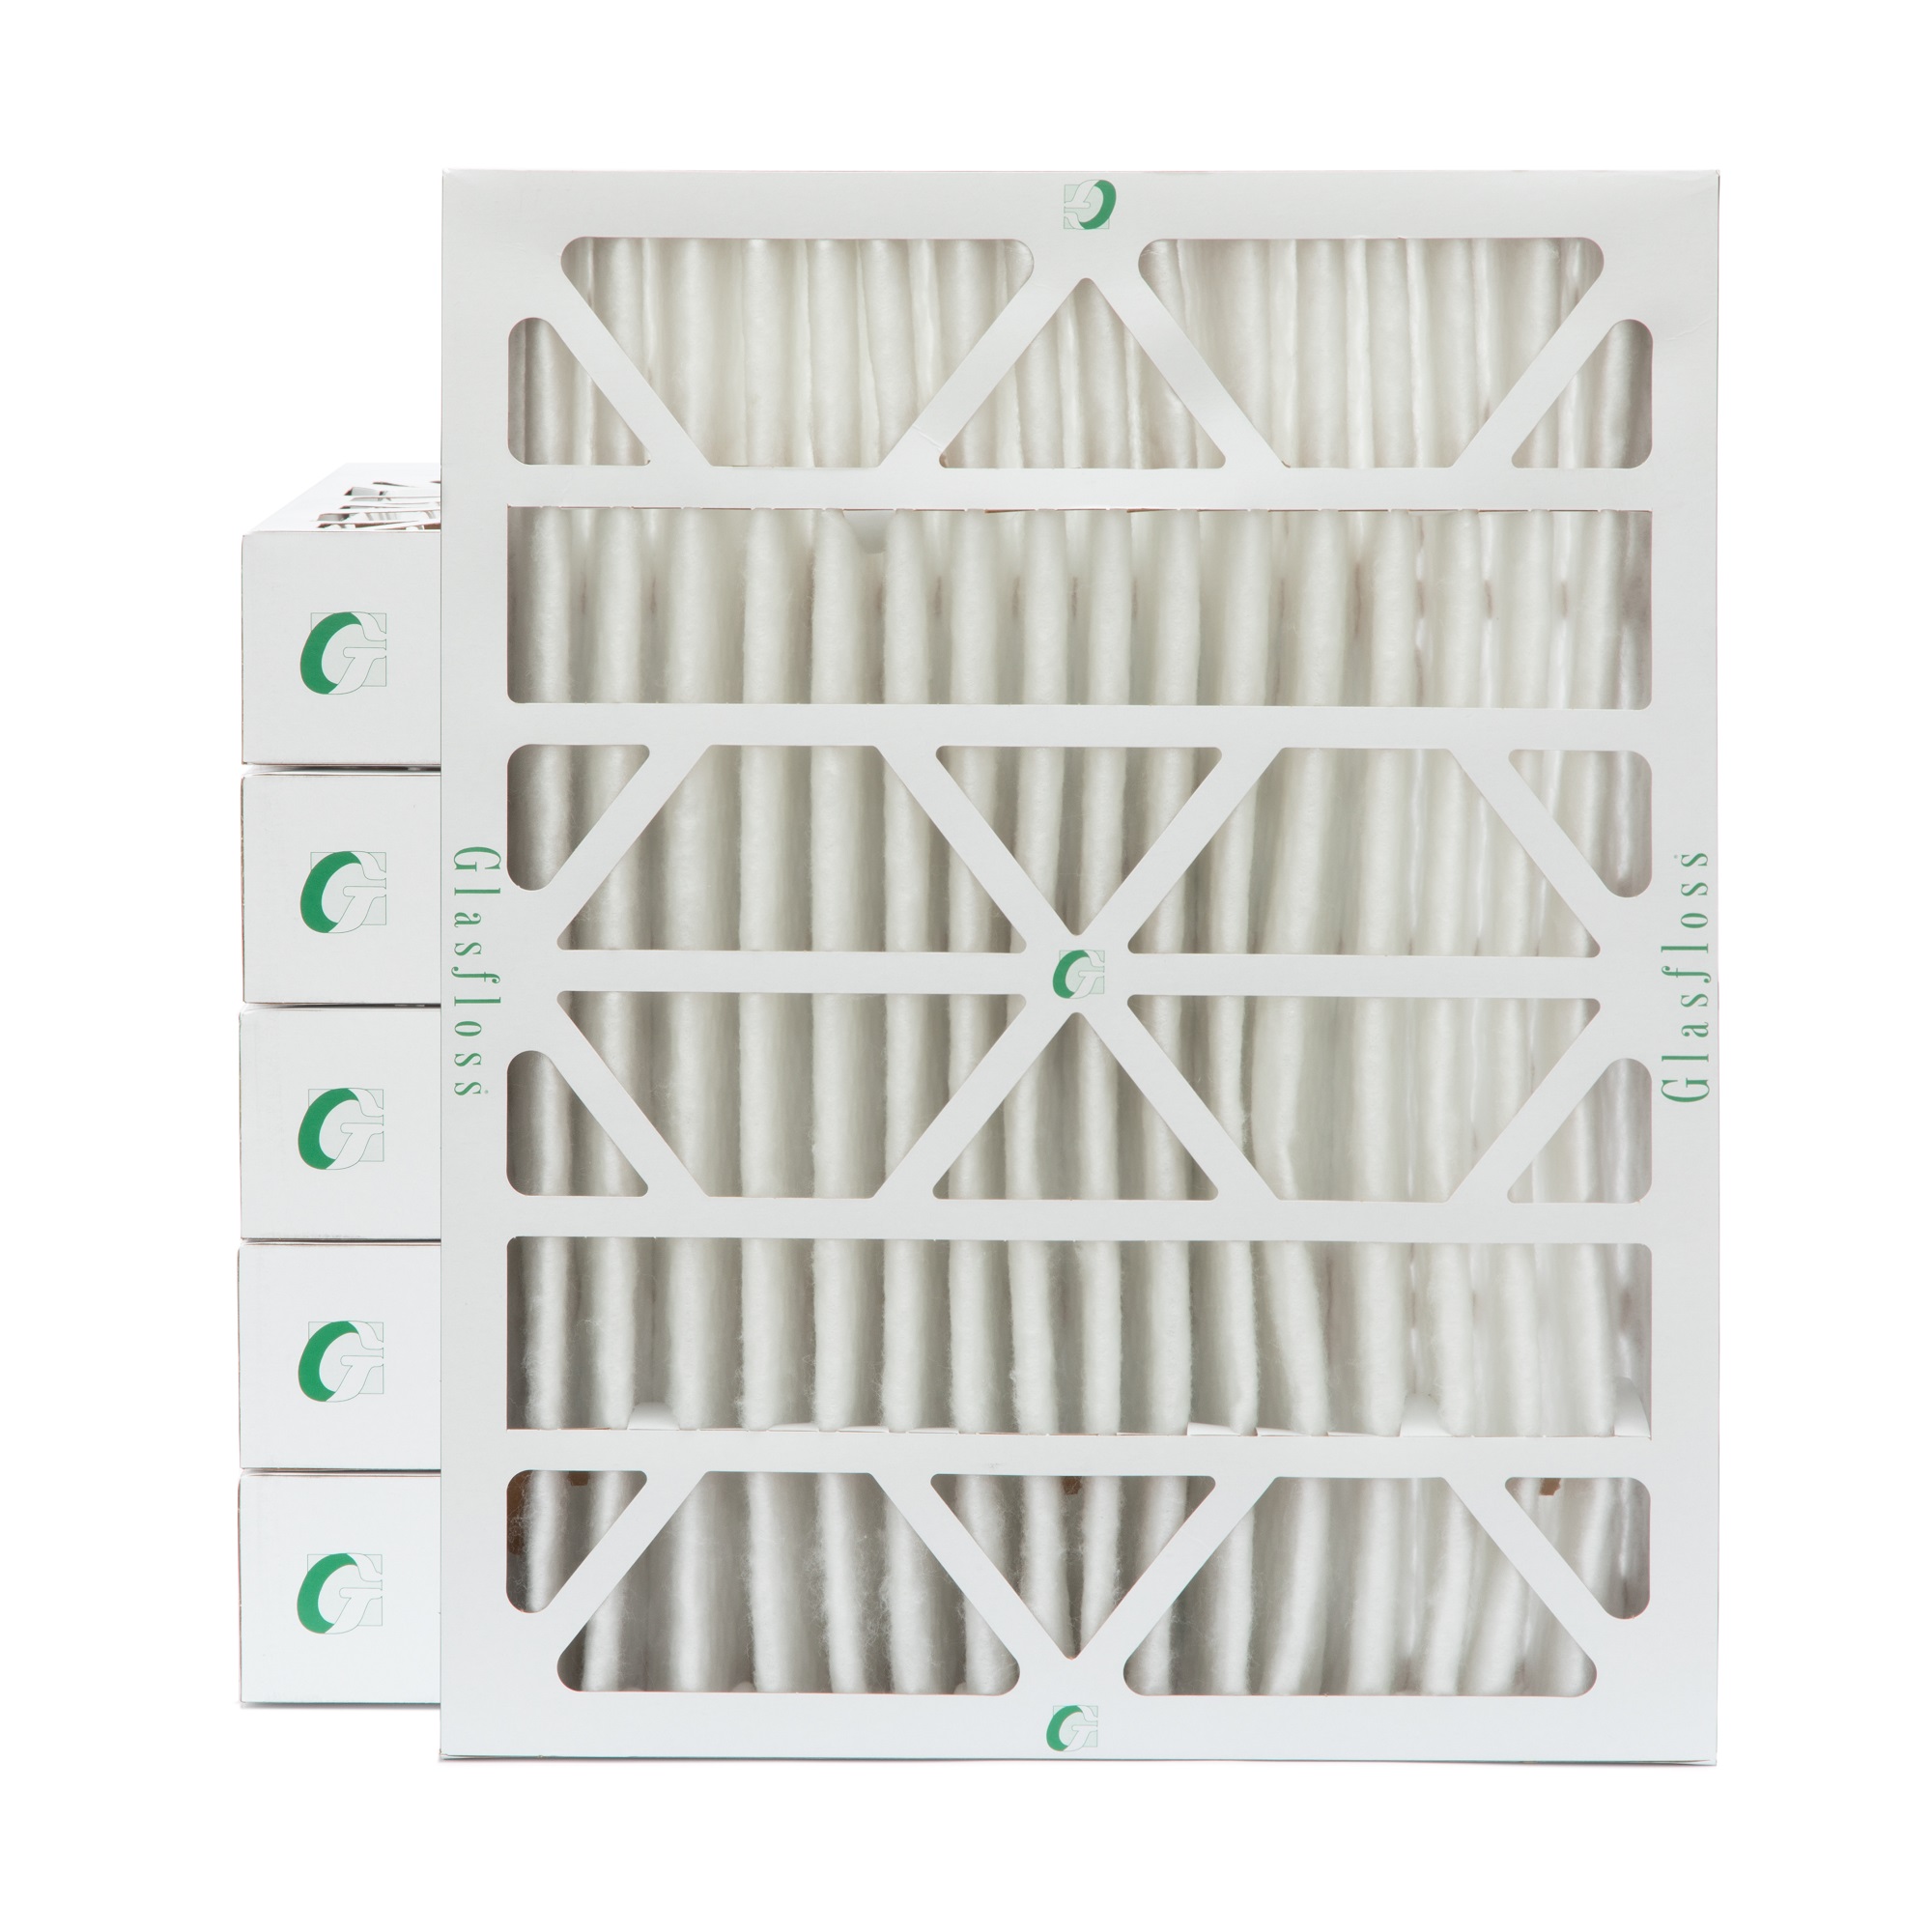 Glasfloss ZL 20x25x4 MERV 10 Pleated Air Filters. Case of 6. Actual Size: 19-1/2 x 24-1/2 x 3-3/4